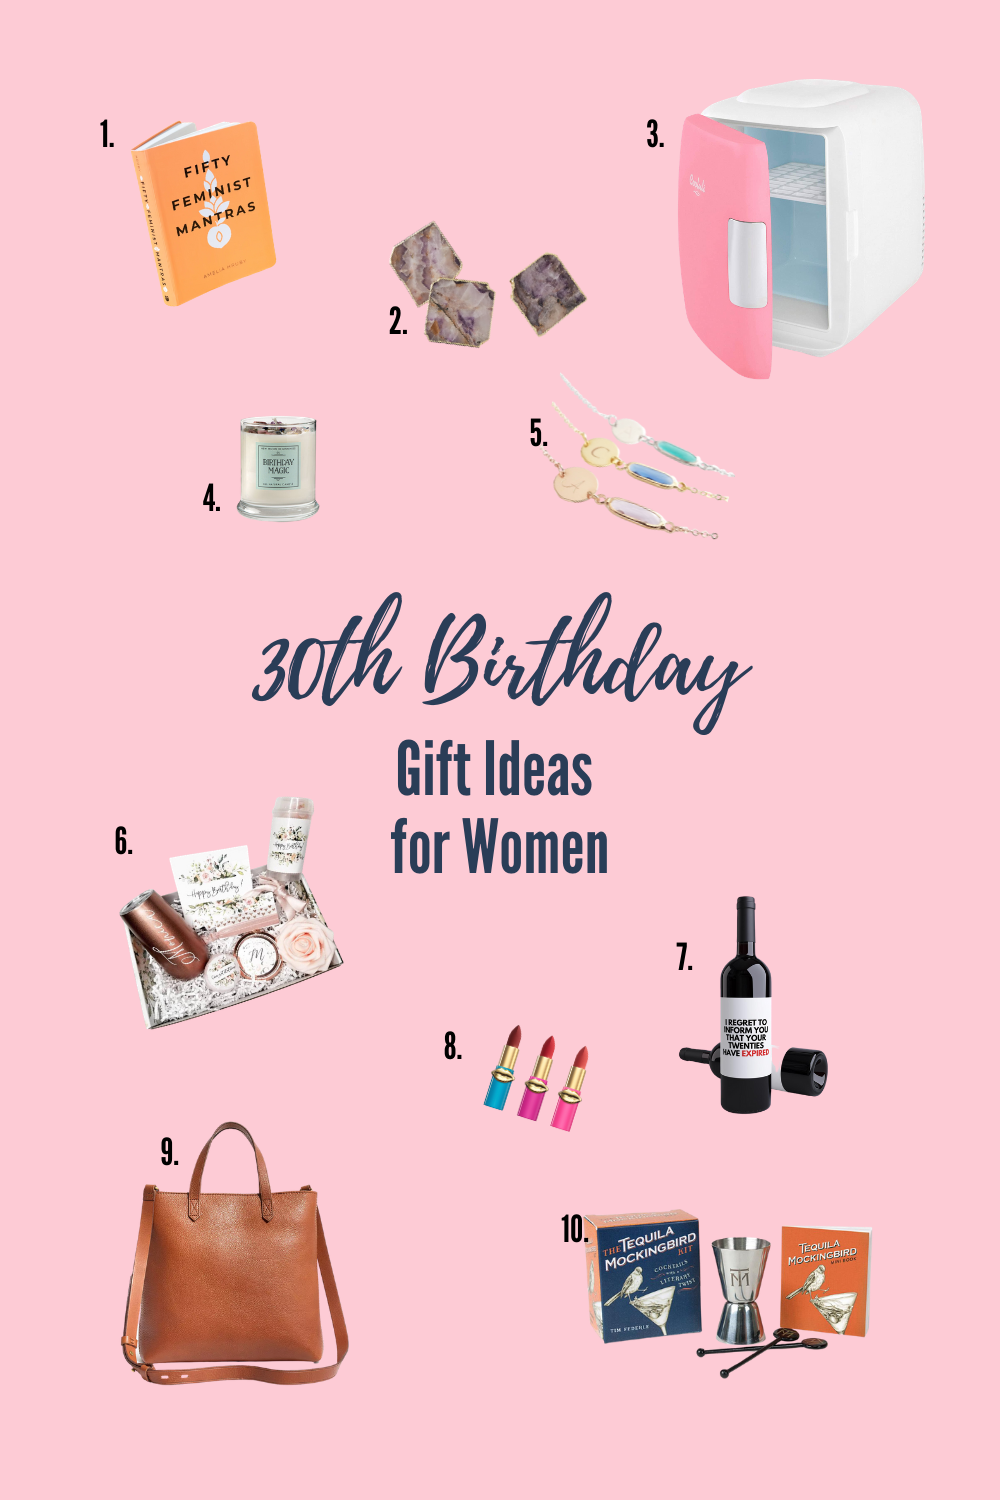 https://www.dousedinpink.com/wp-content/uploads/2021/06/30th-birthday-gifts-for-women.png